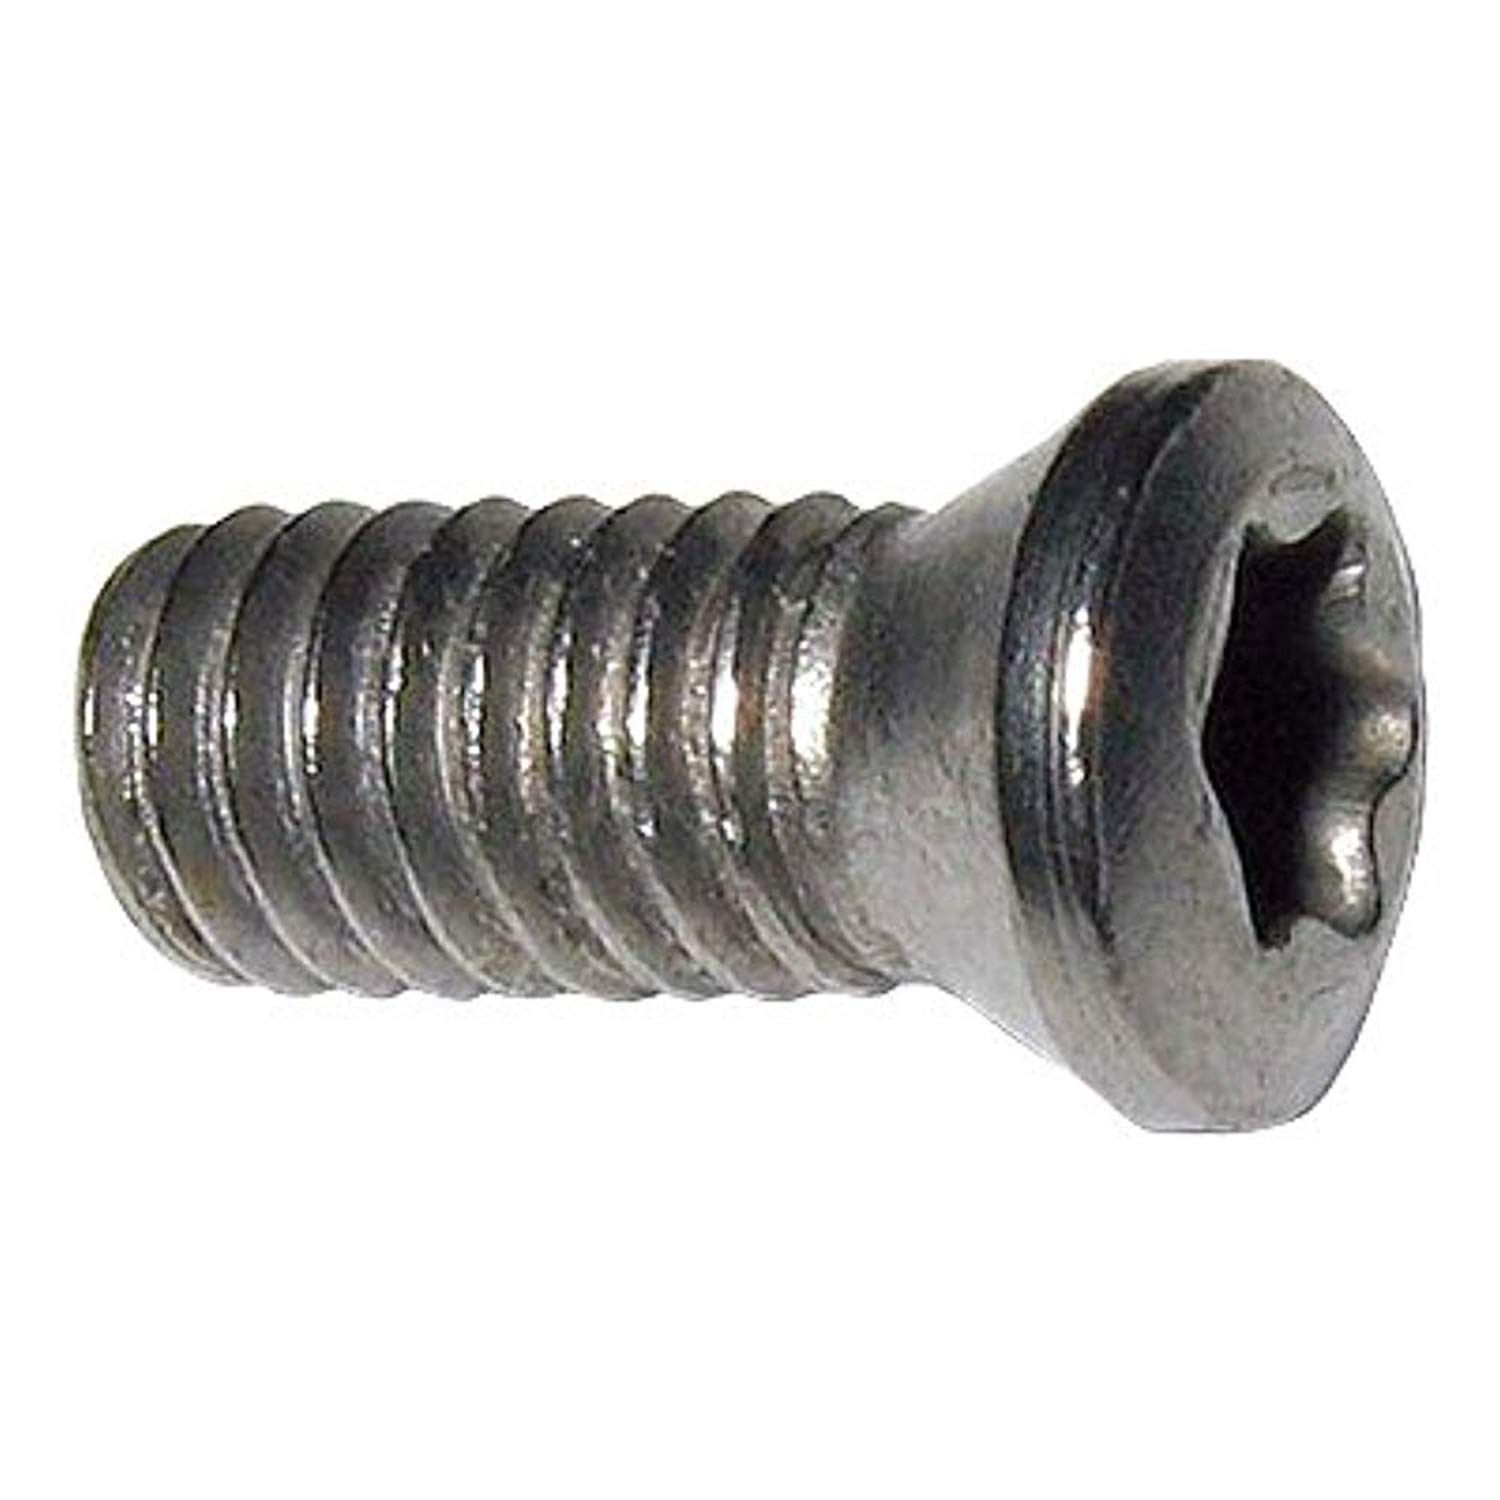 M2.5 SCREW FOR 1/4 & 3/8" INDEXABLE TURNING TOOLS (2003-0012)